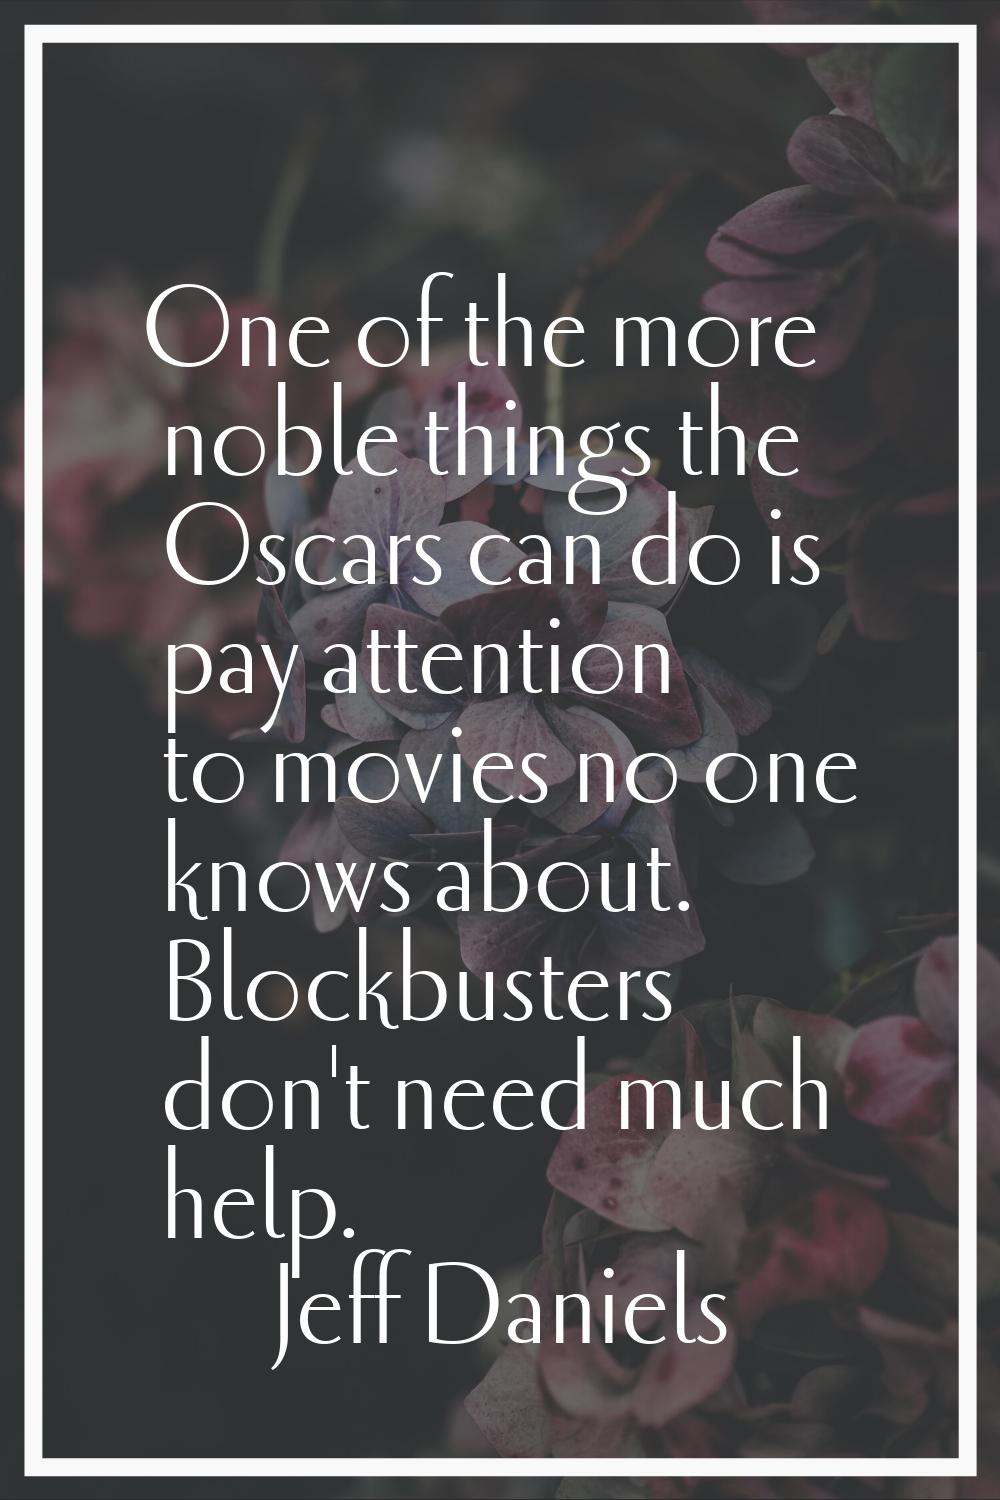 One of the more noble things the Oscars can do is pay attention to movies no one knows about. Block